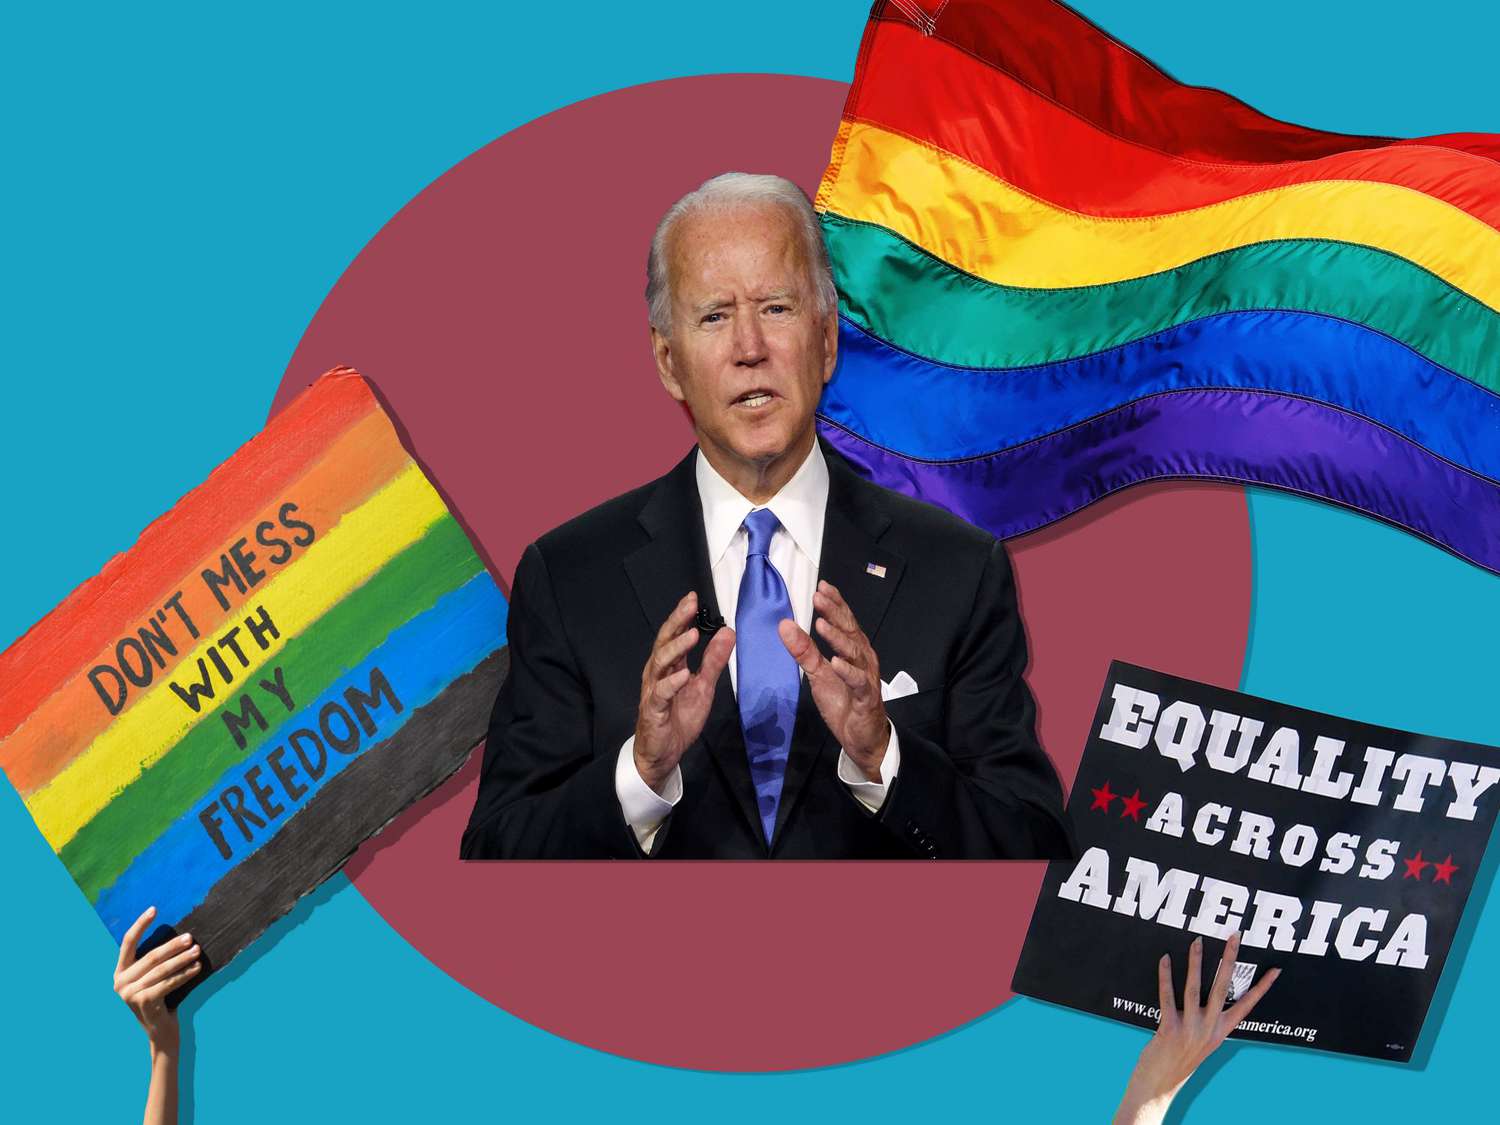 An image composition of Joe Biden and LGBTQIA equality signs.